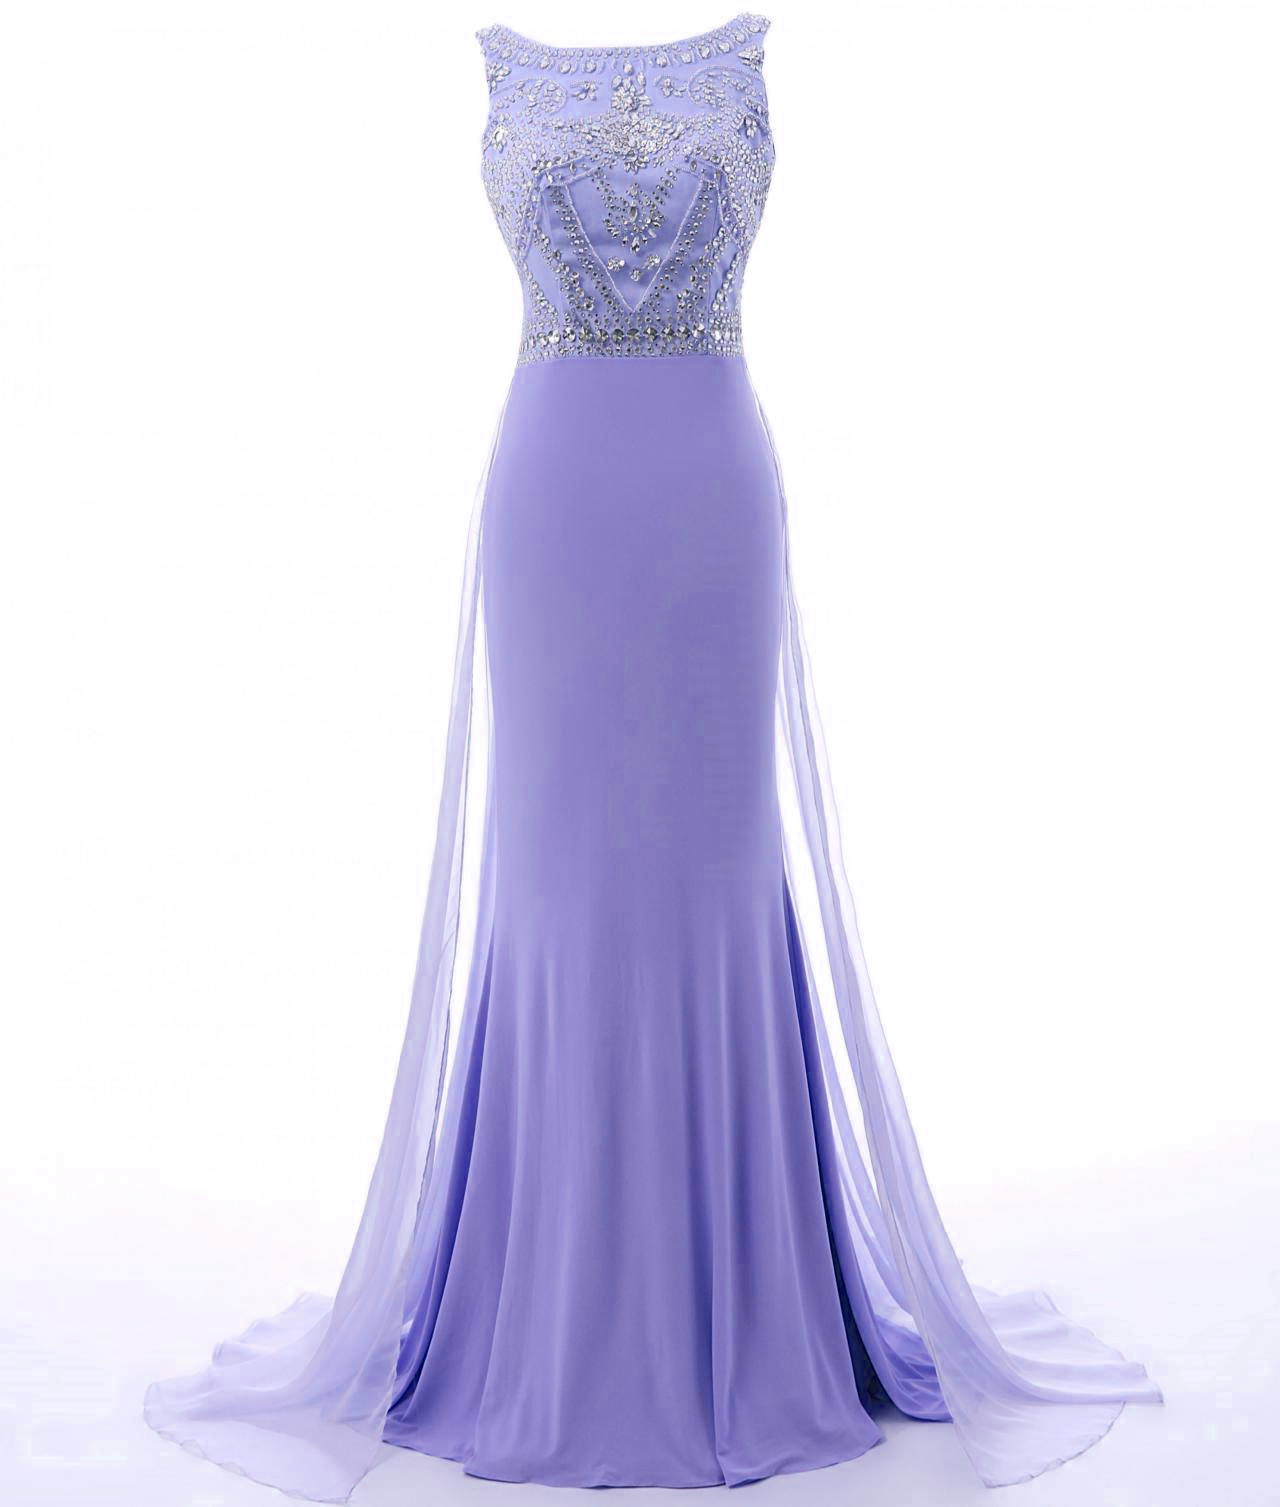 Lilac Mermaid Beaded Long Party Dress, Spandex Round Neckline Formal ...